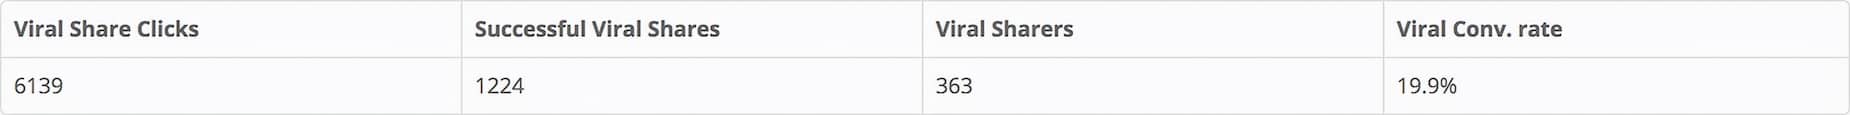 Viral Share results from Adore Me's giveaway campaign